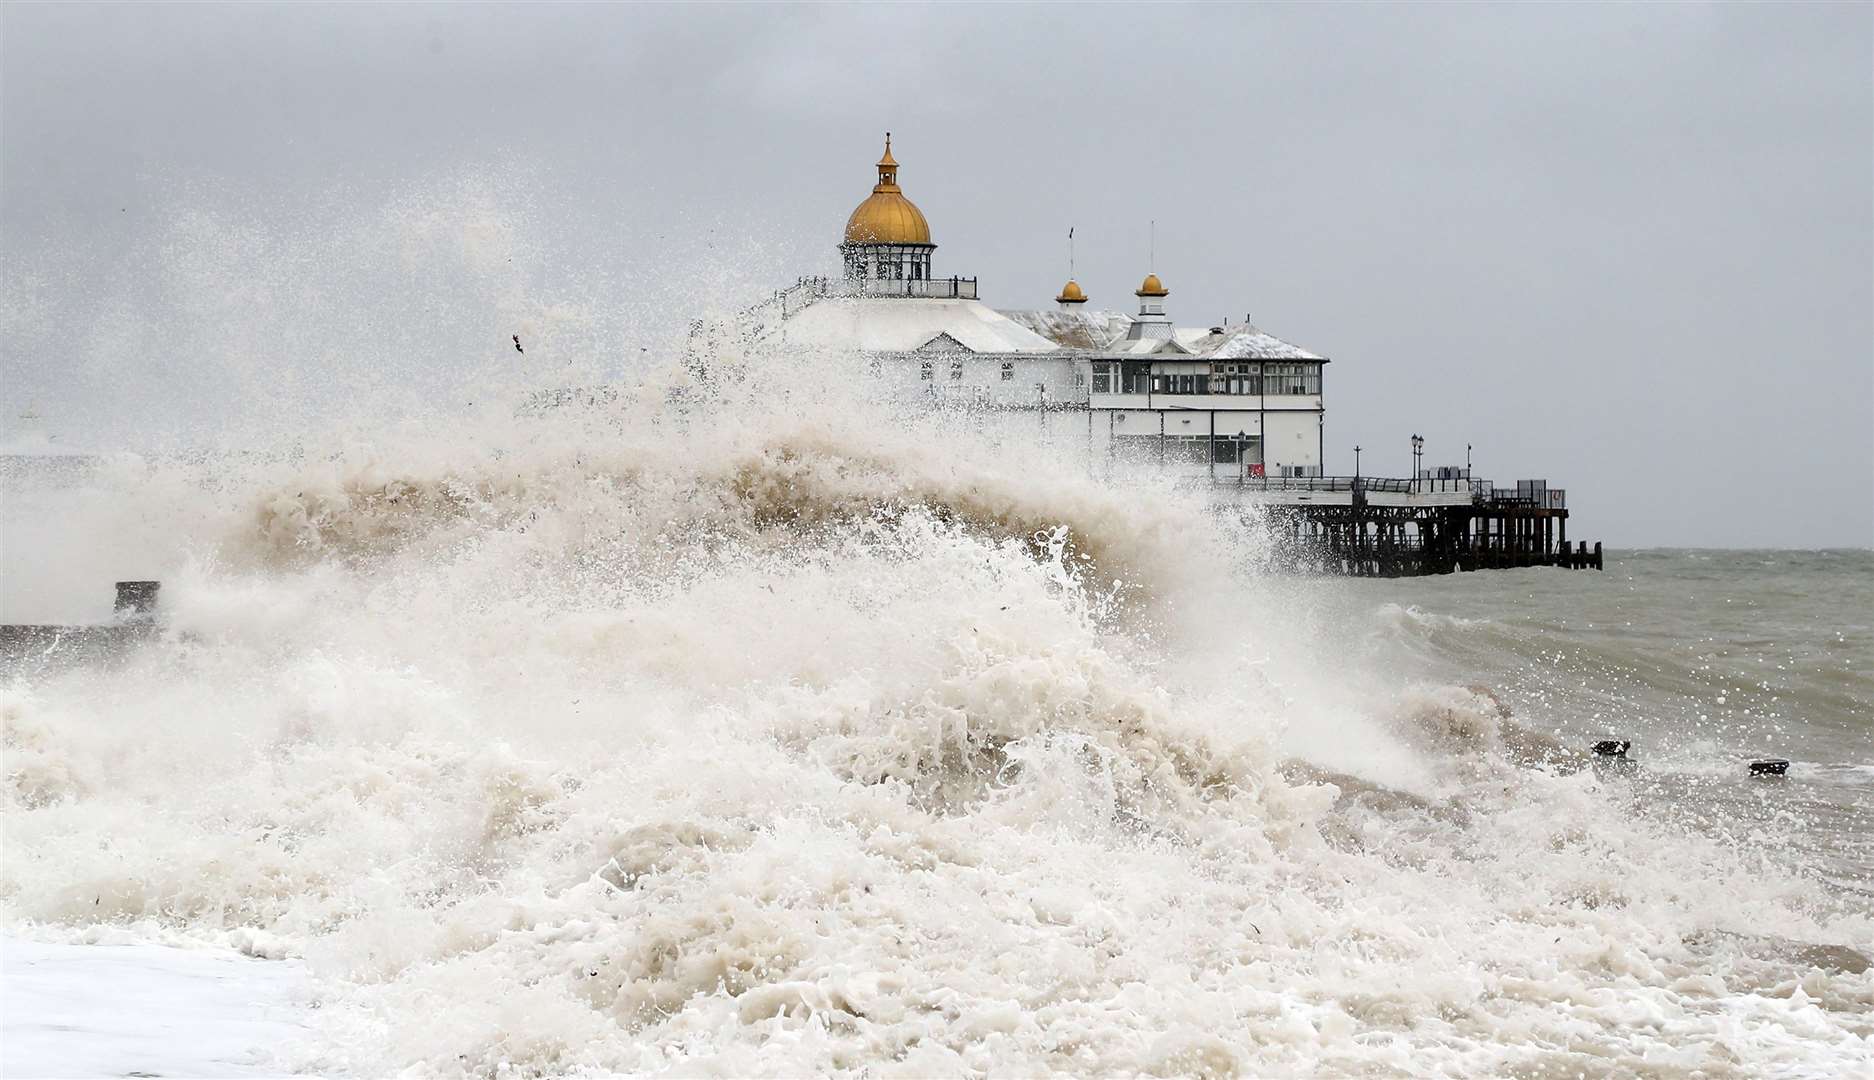 Large waves could hit parts of the south coast on Friday (Gareth Fuller/PA).